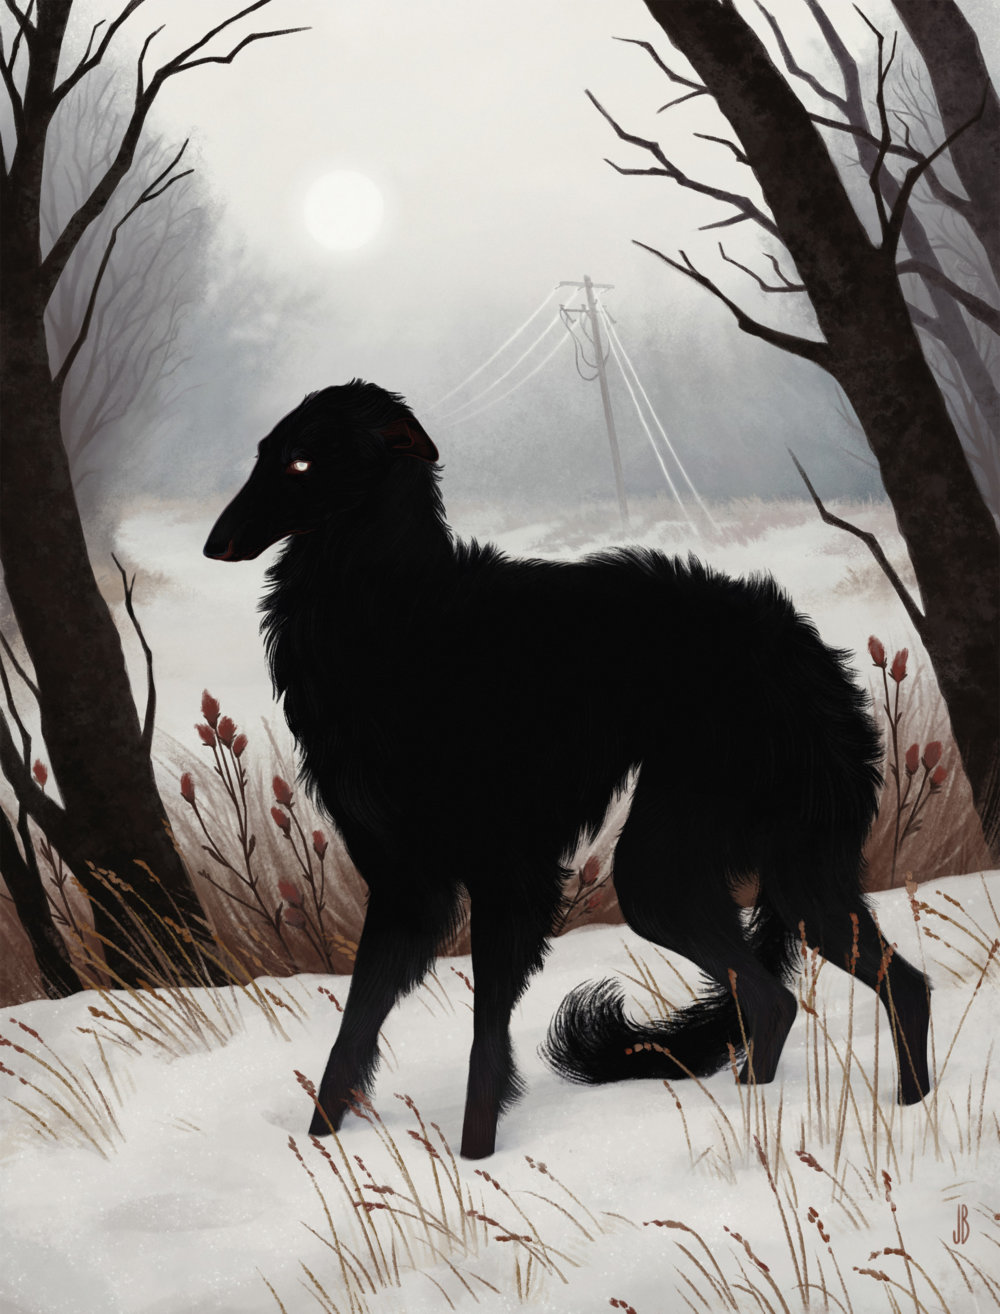 Mysterious And Shadowy Animal Illustrations By Jenna Barton 7